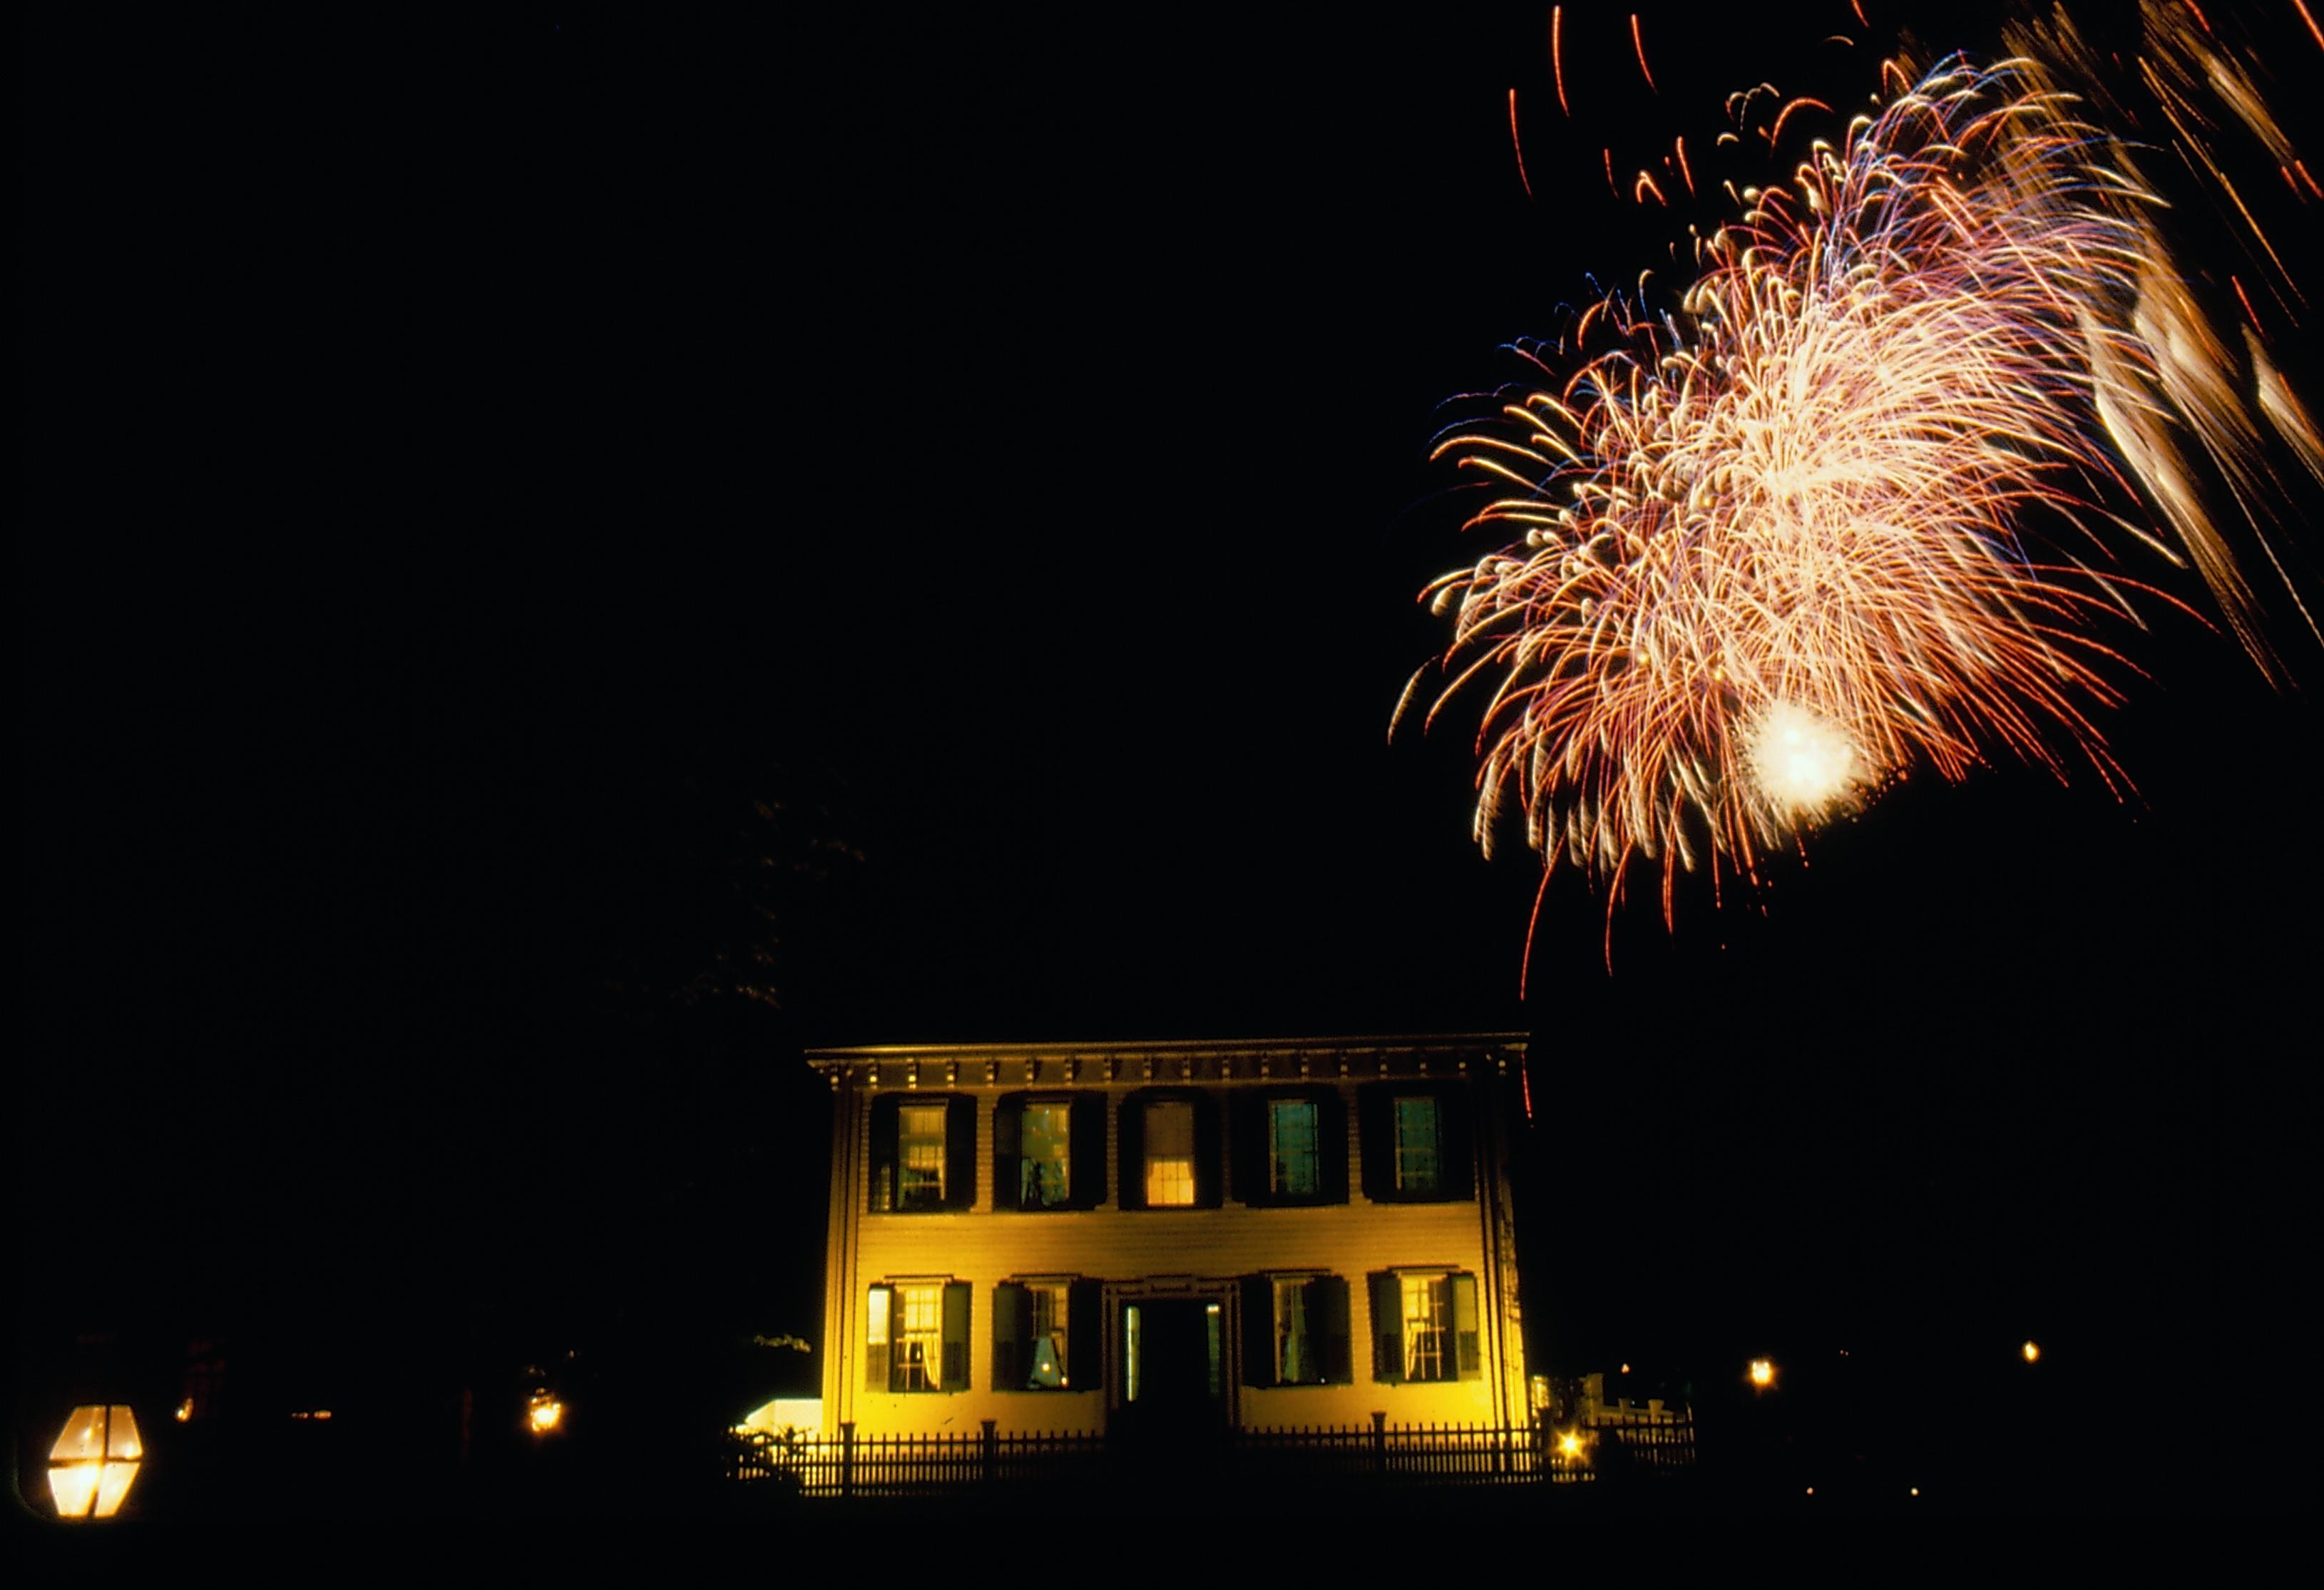 NA LIHO Reopening - Night Lincoln, Home, Restoration, Rededication, Night, Fireworks